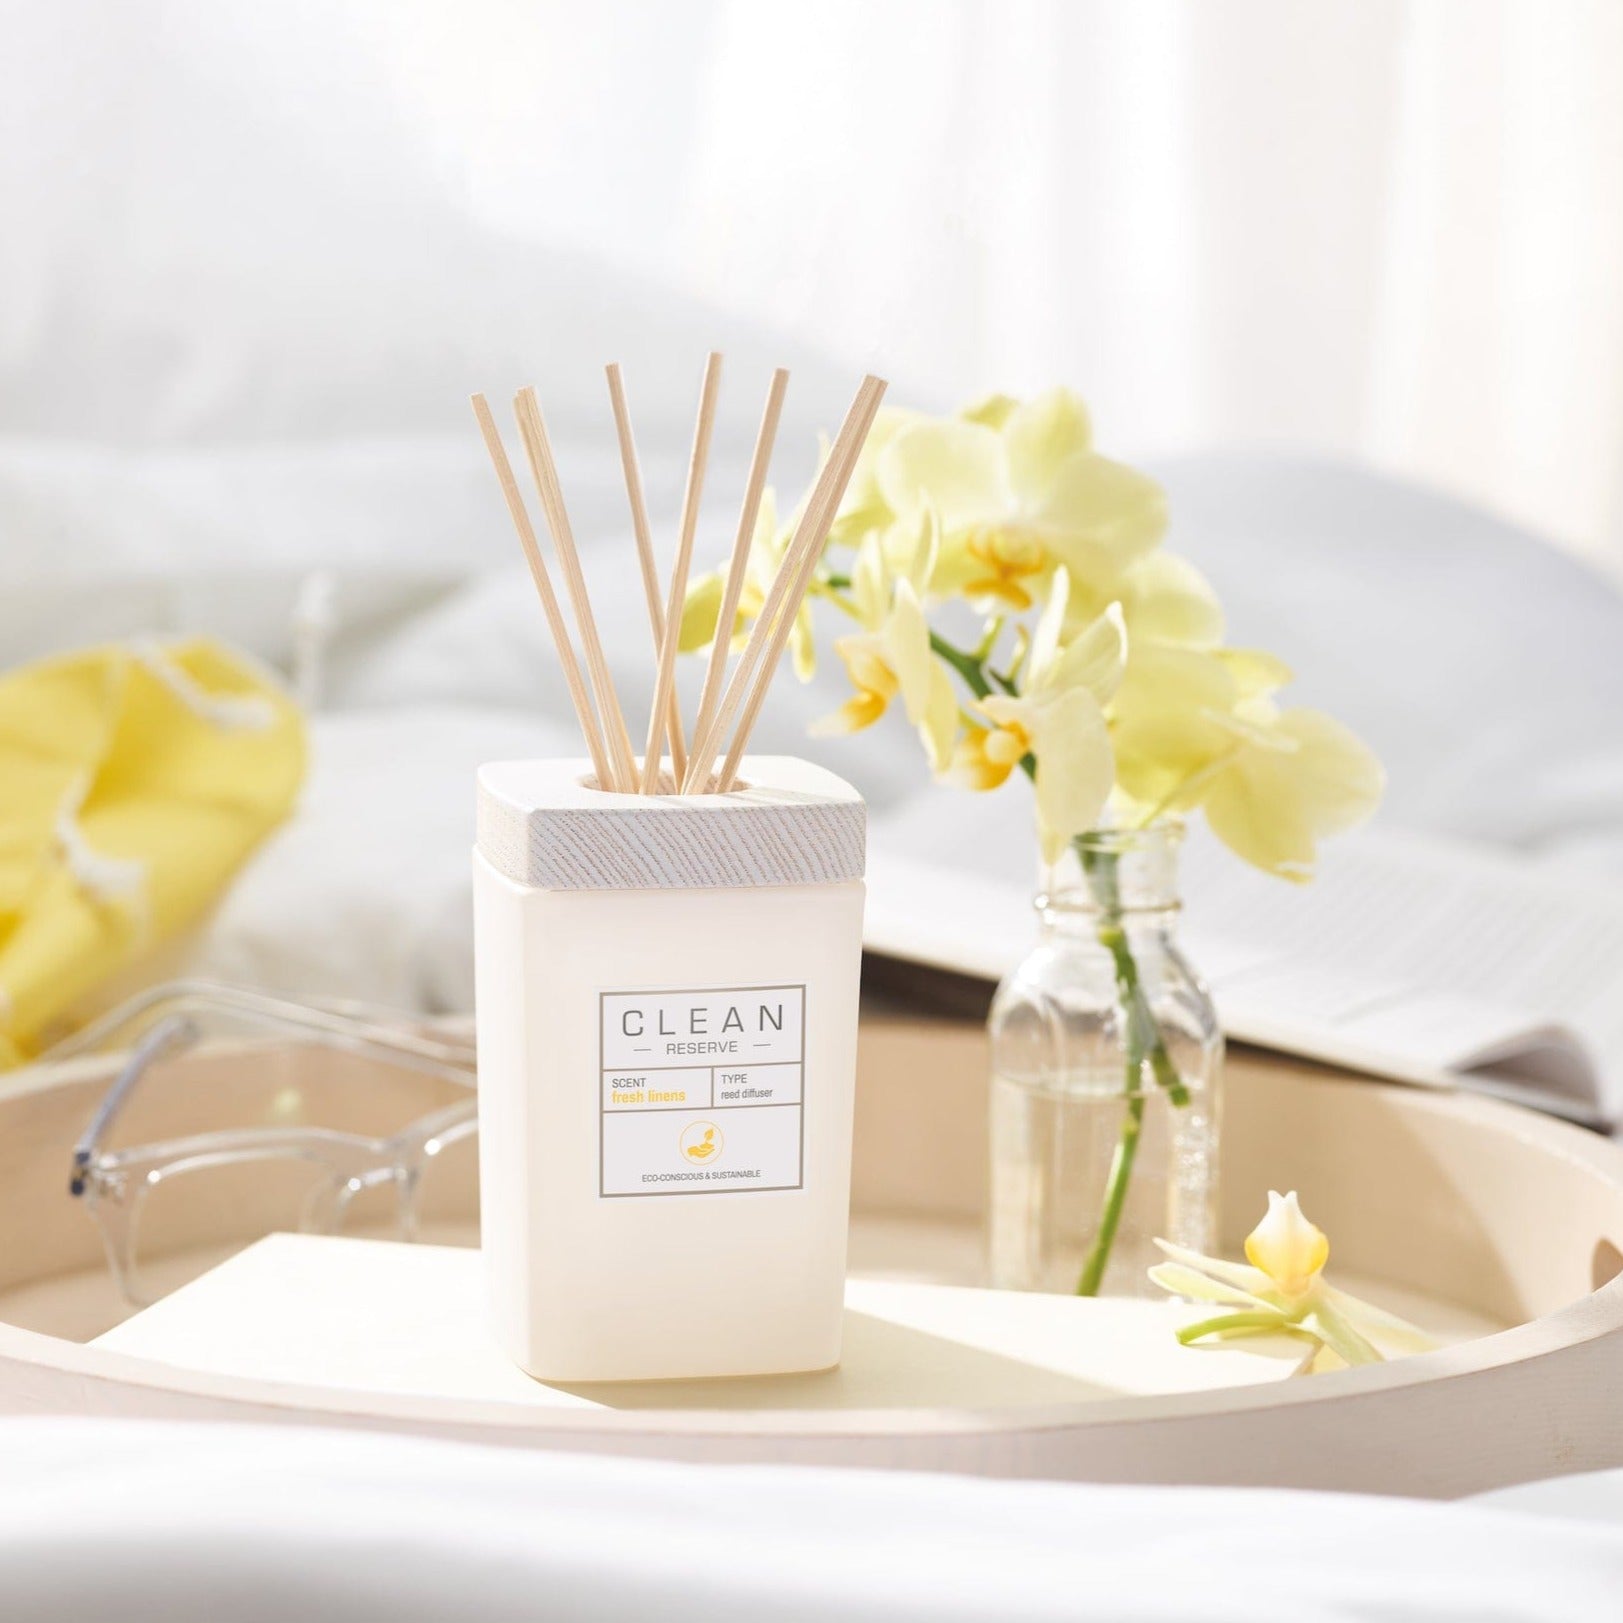 Scented reed diffuser samples